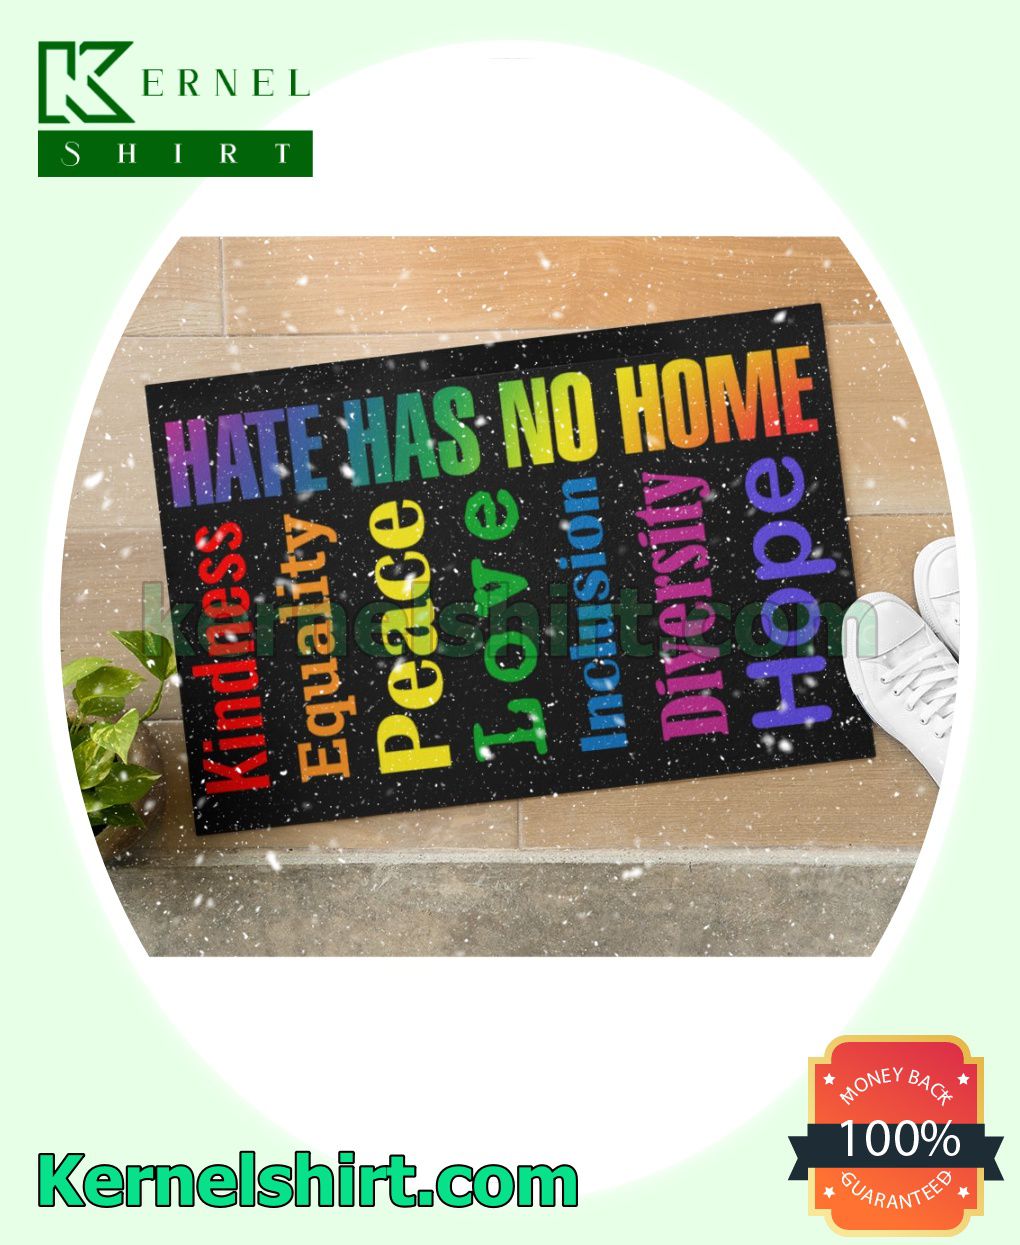 Hate Has No Home Kindness Equality Peace Love Inclusion Diversity Hope Indoor Outdoor Door Rug c